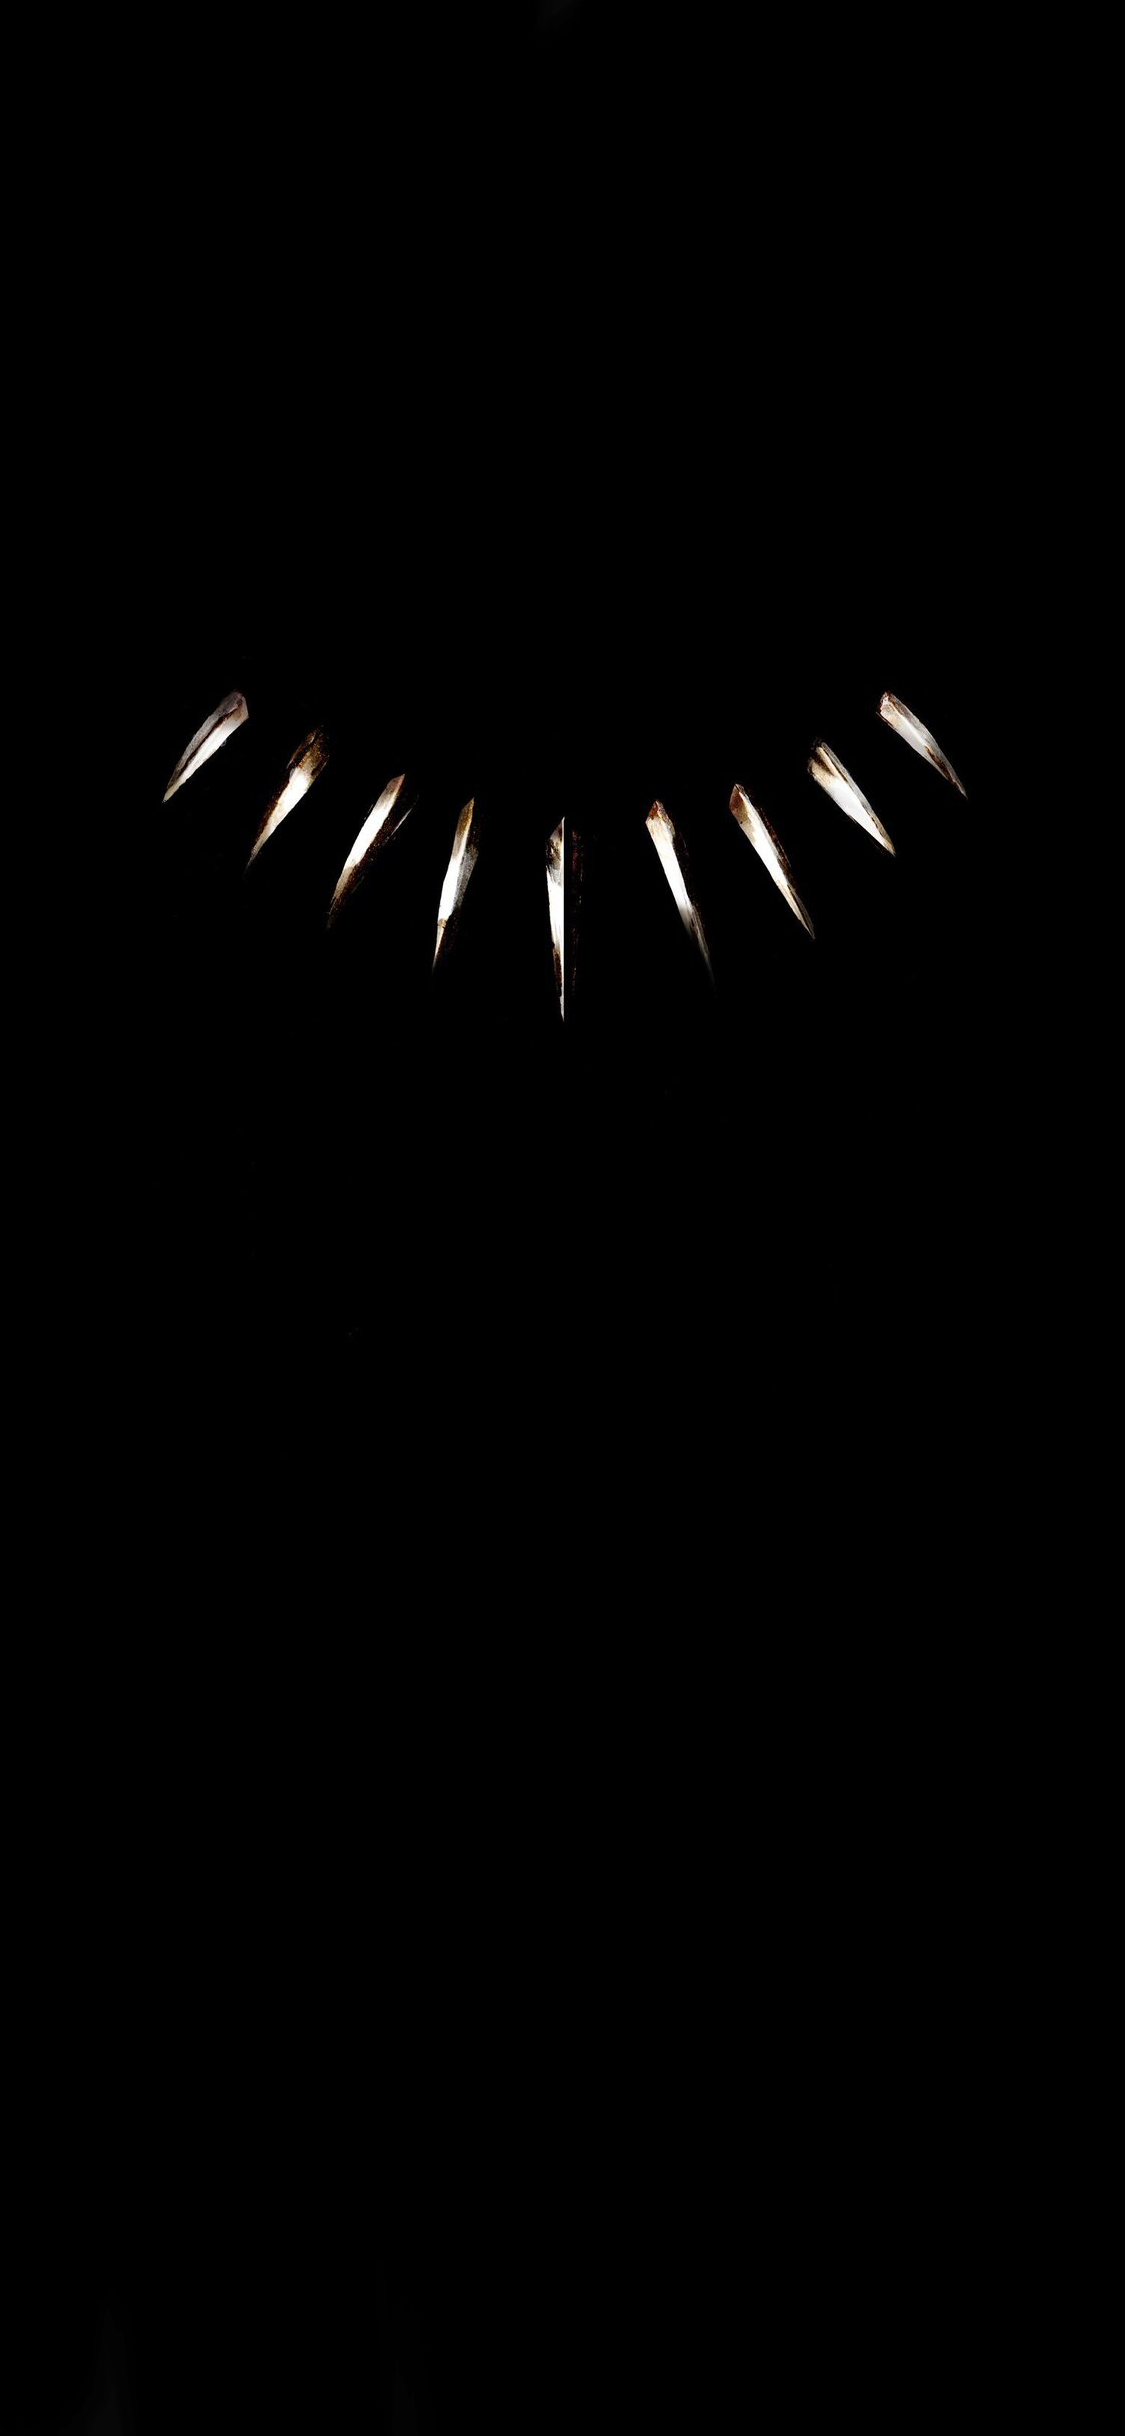 Black Panther Soundtrack wallpaper. It looks great on an AMOLED